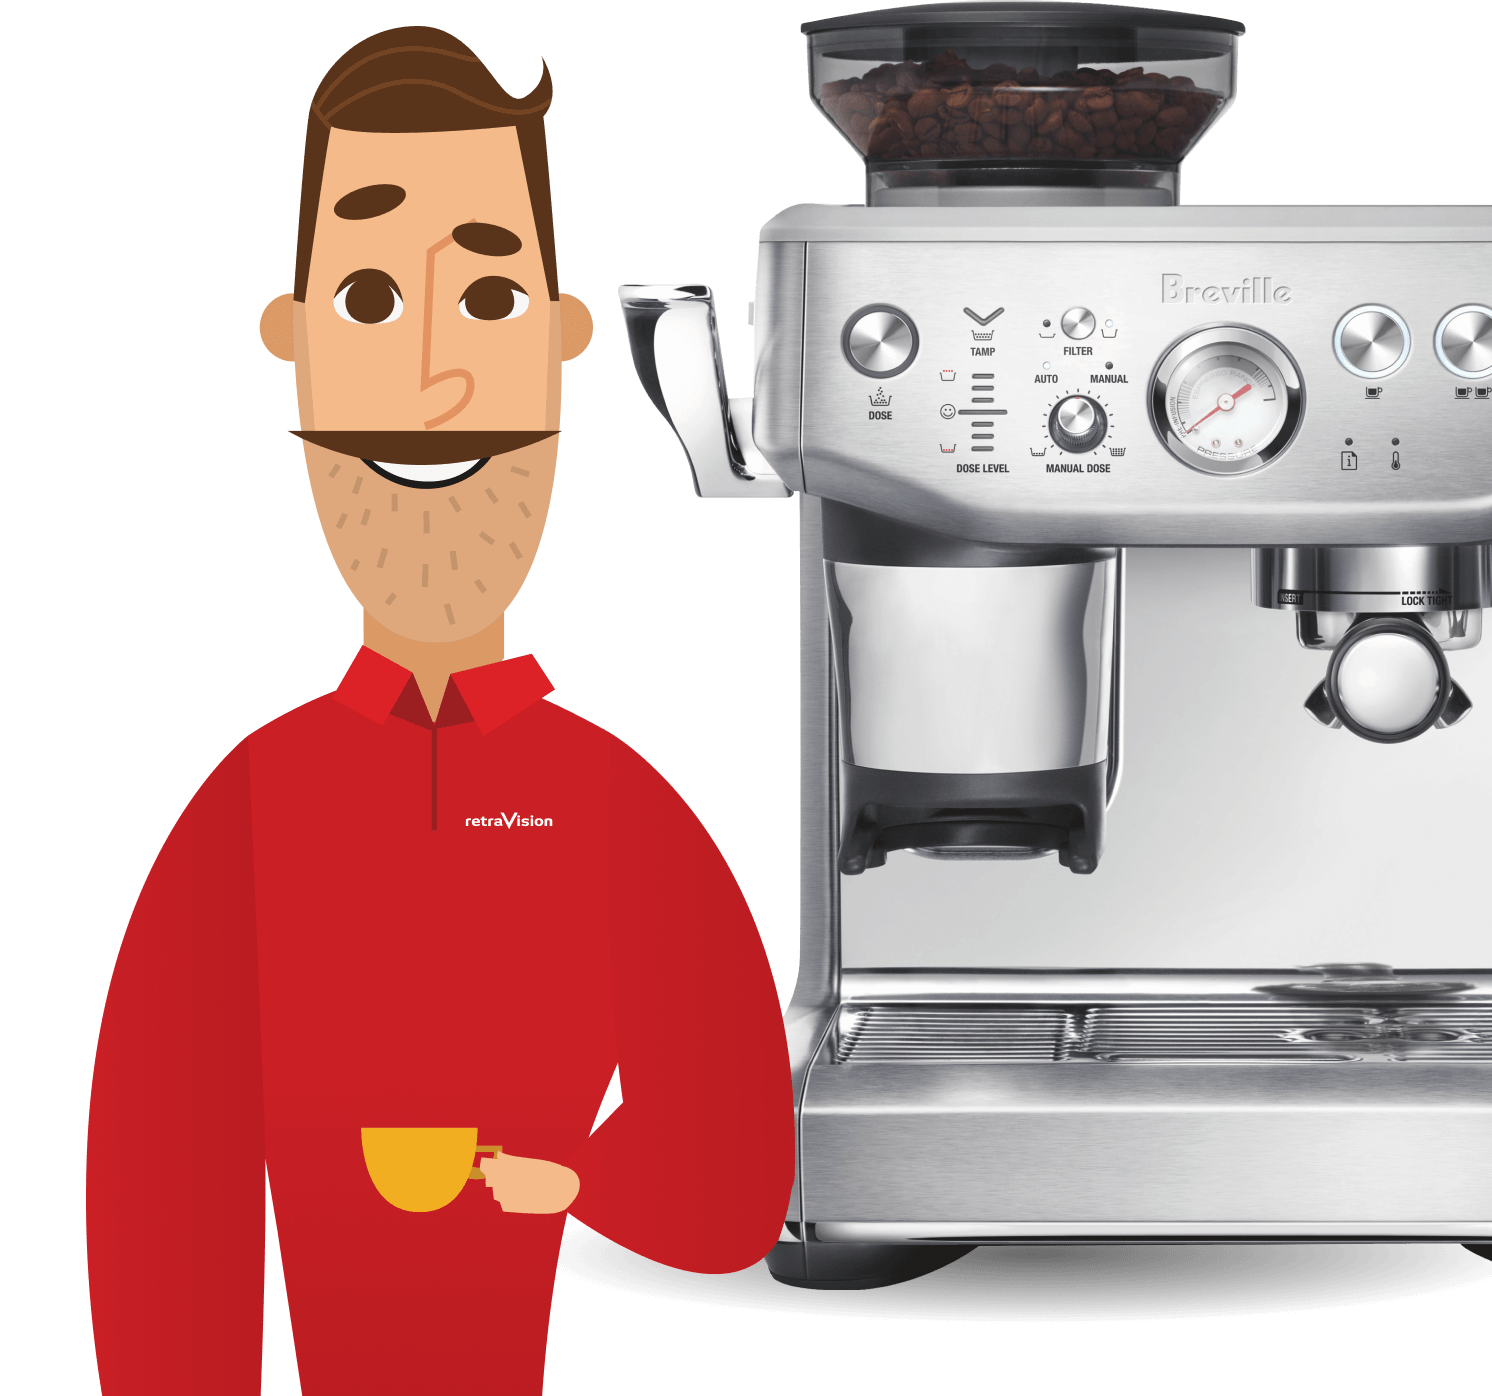 Retravision character with Breville Coffee Machine